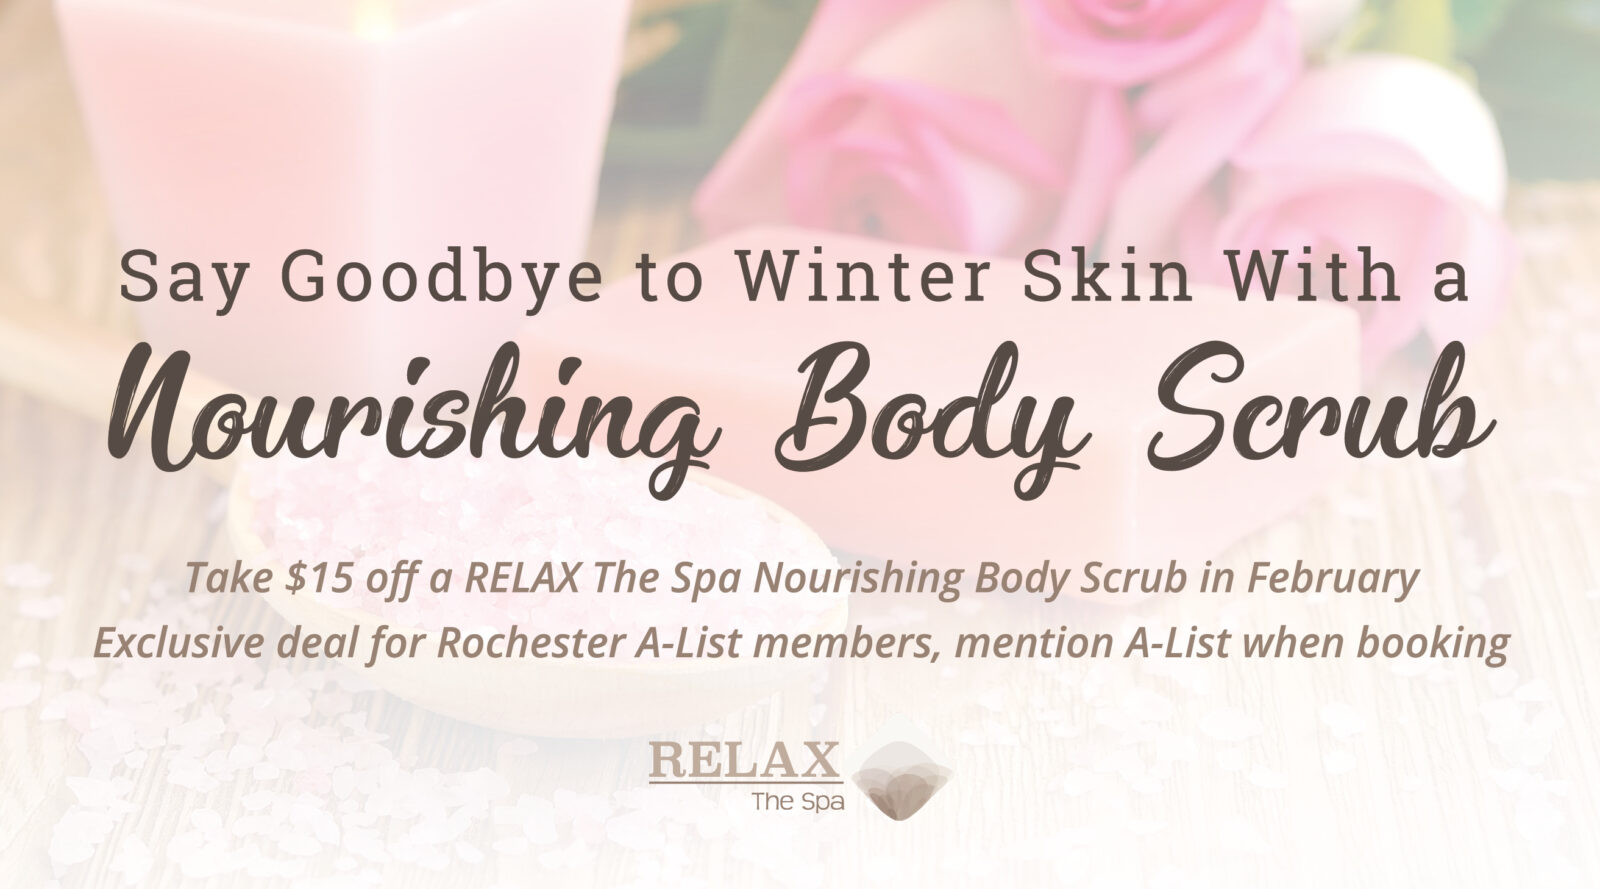 $15 off at Relax the Spa in Feb.